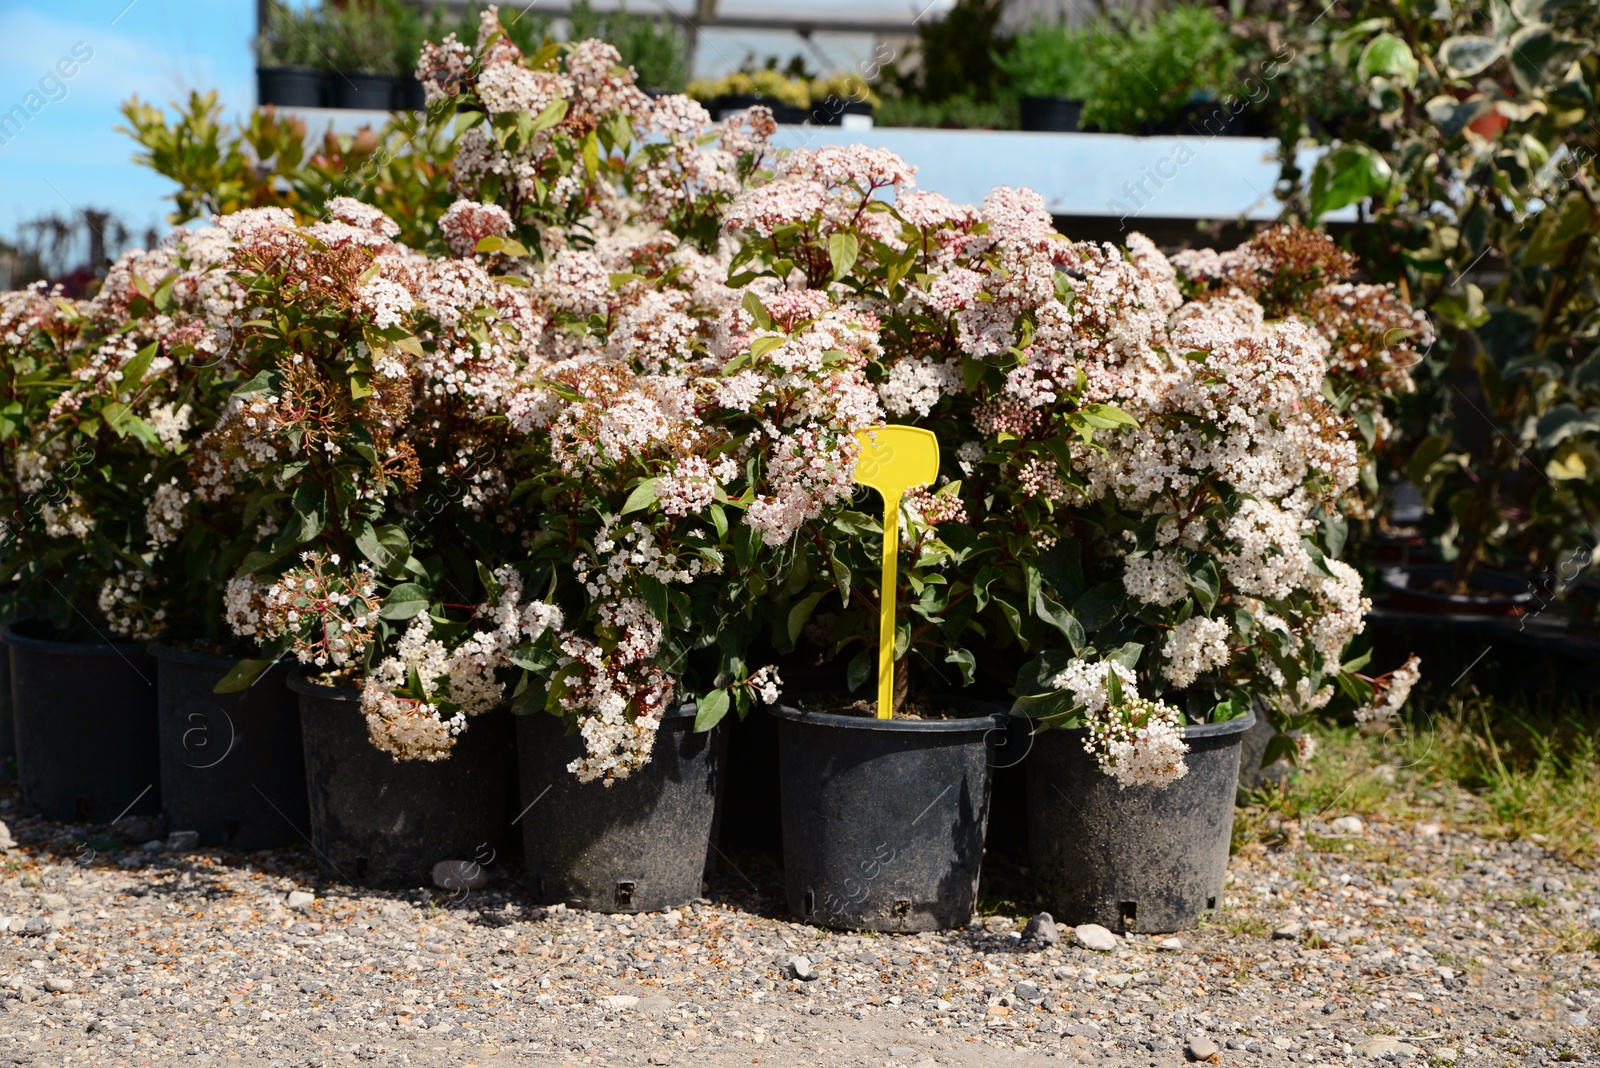 Photo of Many pots with Viburnum Tinus plants outdoors on sunny day